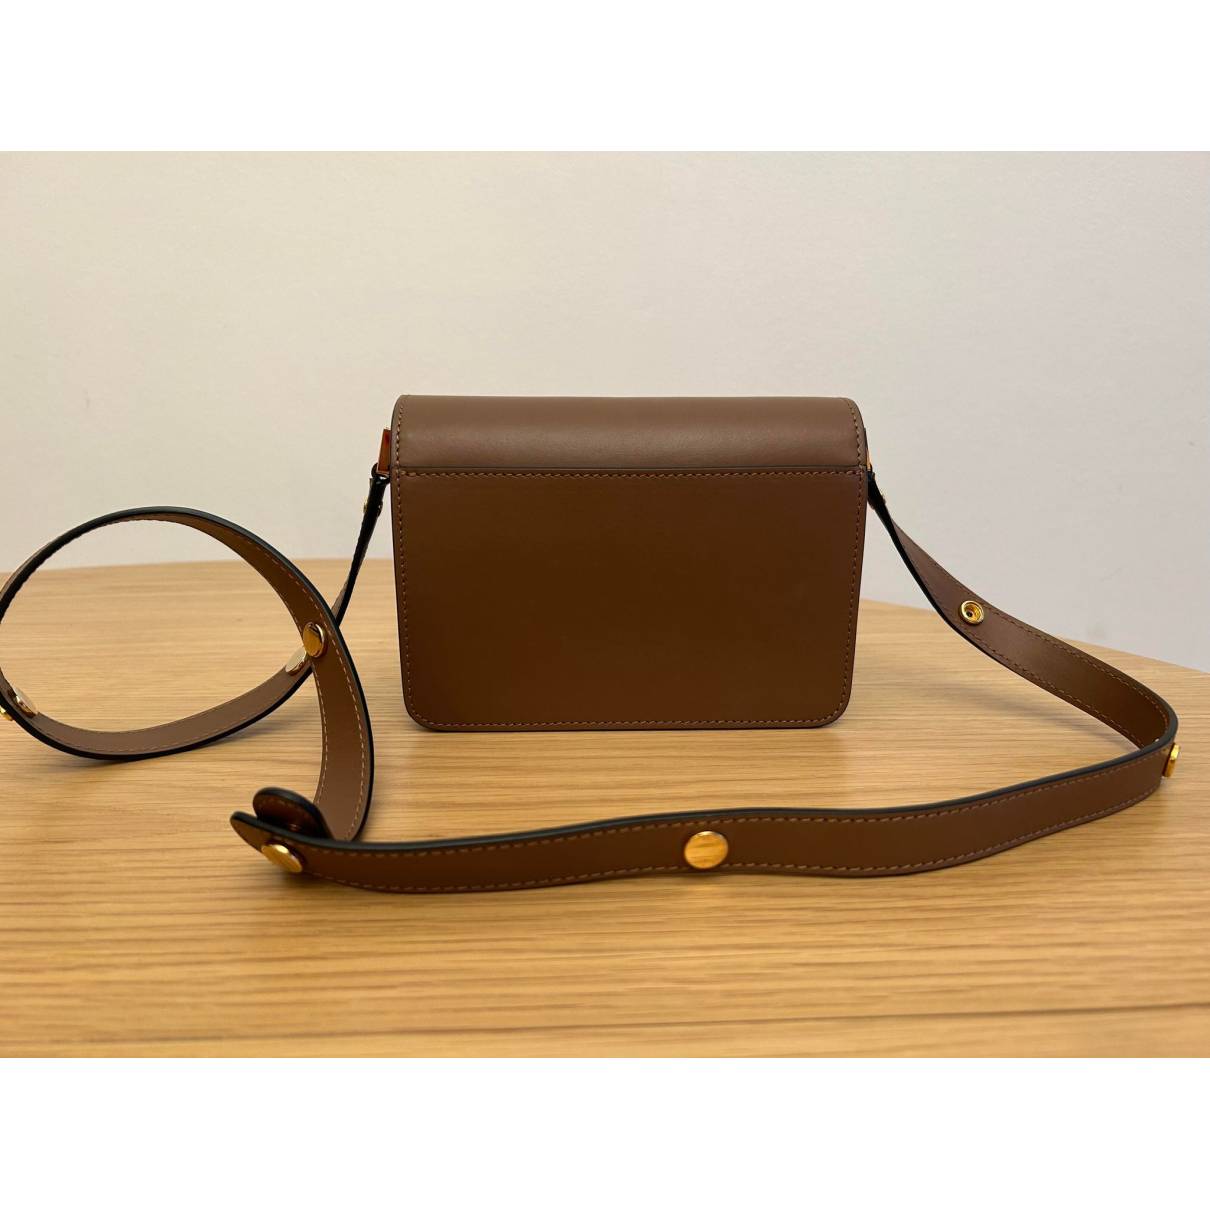 Marni - Authenticated Trunk Handbag - Leather Brown Plain For Woman, Never Worn